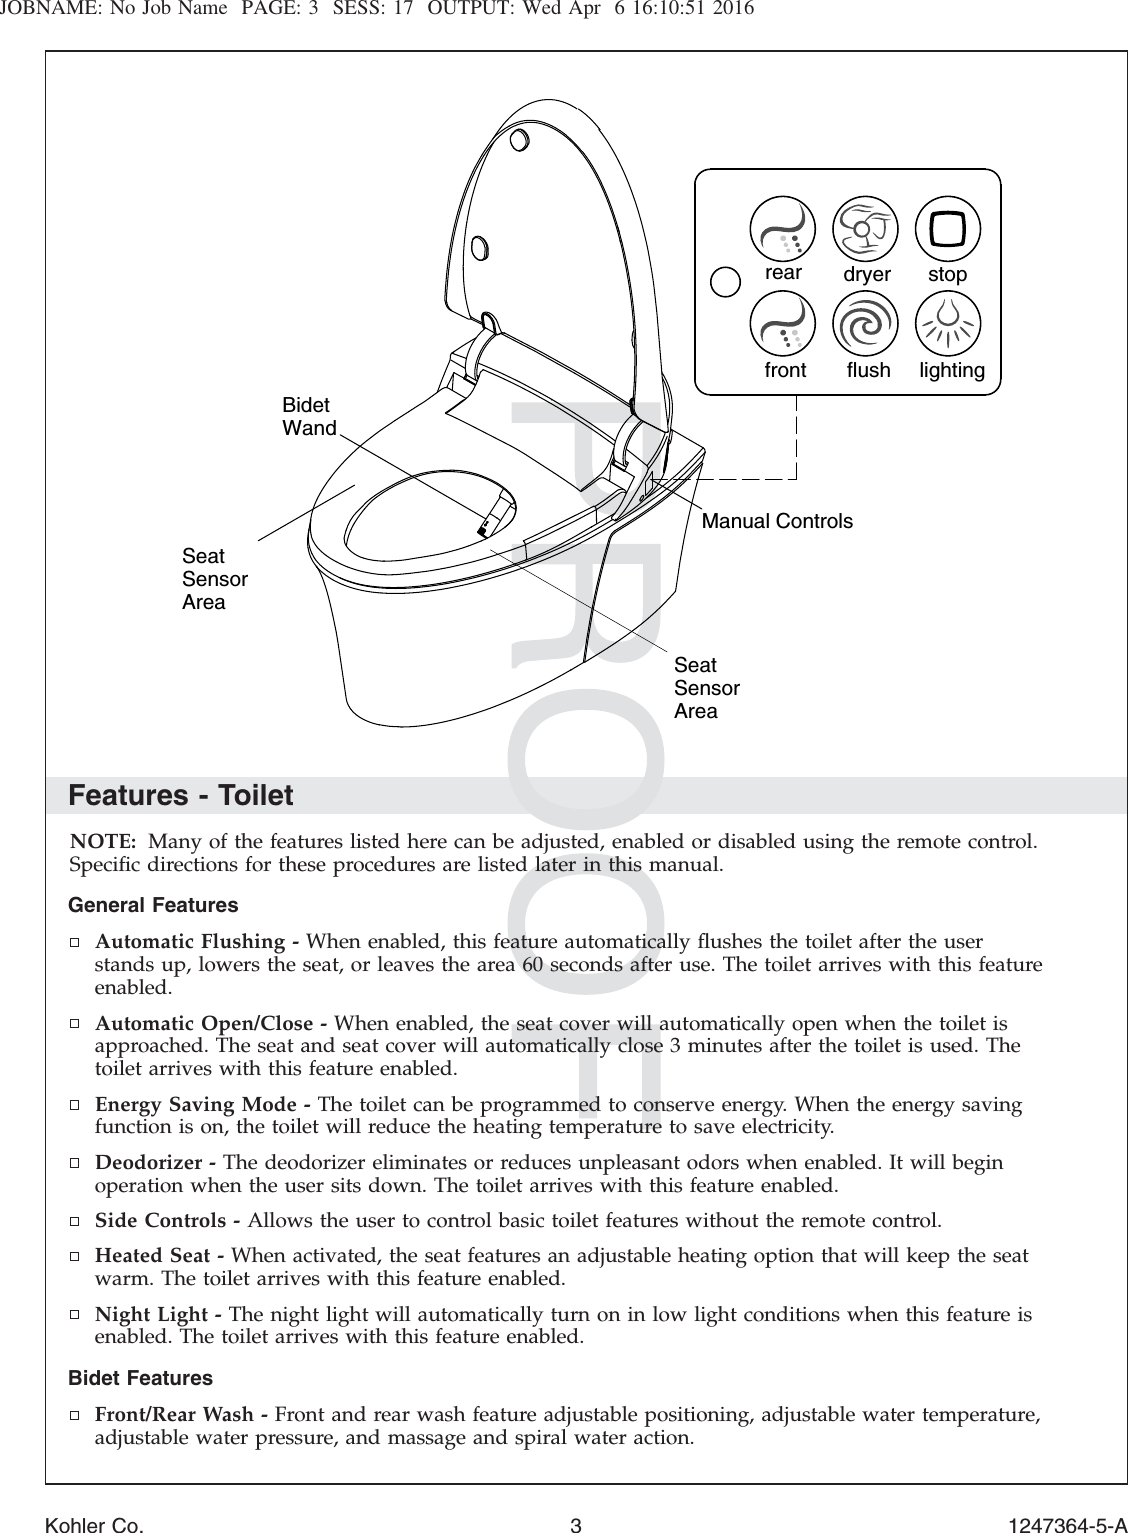 JOBNAME: No Job Name PAGE: 3 SESS: 17 OUTPUT: Wed Apr 6 16:10:51 2016Features - ToiletNOTE: Many of the features listed here can be adjusted, enabled or disabled using the remote control.Speciﬁc directions for these procedures are listed later in this manual.General FeaturesAutomatic Flushing - When enabled, this feature automatically ﬂushes the toilet after the userstands up, lowers the seat, or leaves the area 60 seconds after use. The toilet arrives with this featureenabled.Automatic Open/Close - When enabled, the seat cover will automatically open when the toilet isapproached. The seat and seat cover will automatically close 3 minutes after the toilet is used. Thetoilet arrives with this feature enabled.Energy Saving Mode - The toilet can be programmed to conserve energy. When the energy savingfunction is on, the toilet will reduce the heating temperature to save electricity.Deodorizer - The deodorizer eliminates or reduces unpleasant odors when enabled. It will beginoperation when the user sits down. The toilet arrives with this feature enabled.Side Controls - Allows the user to control basic toilet features without the remote control.Heated Seat - When activated, the seat features an adjustable heating option that will keep the seatwarm. The toilet arrives with this feature enabled.Night Light - The night light will automatically turn on in low light conditions when this feature isenabled. The toilet arrives with this feature enabled.Bidet FeaturesFront/Rear Wash - Front and rear wash feature adjustable positioning, adjustable water temperature,adjustable water pressure, and massage and spiral water action.Seat SensorArearear dryerfront flush lightingstopSeat SensorAreaBidet WandManual ControlsKohler Co. 3 1247364-5-A